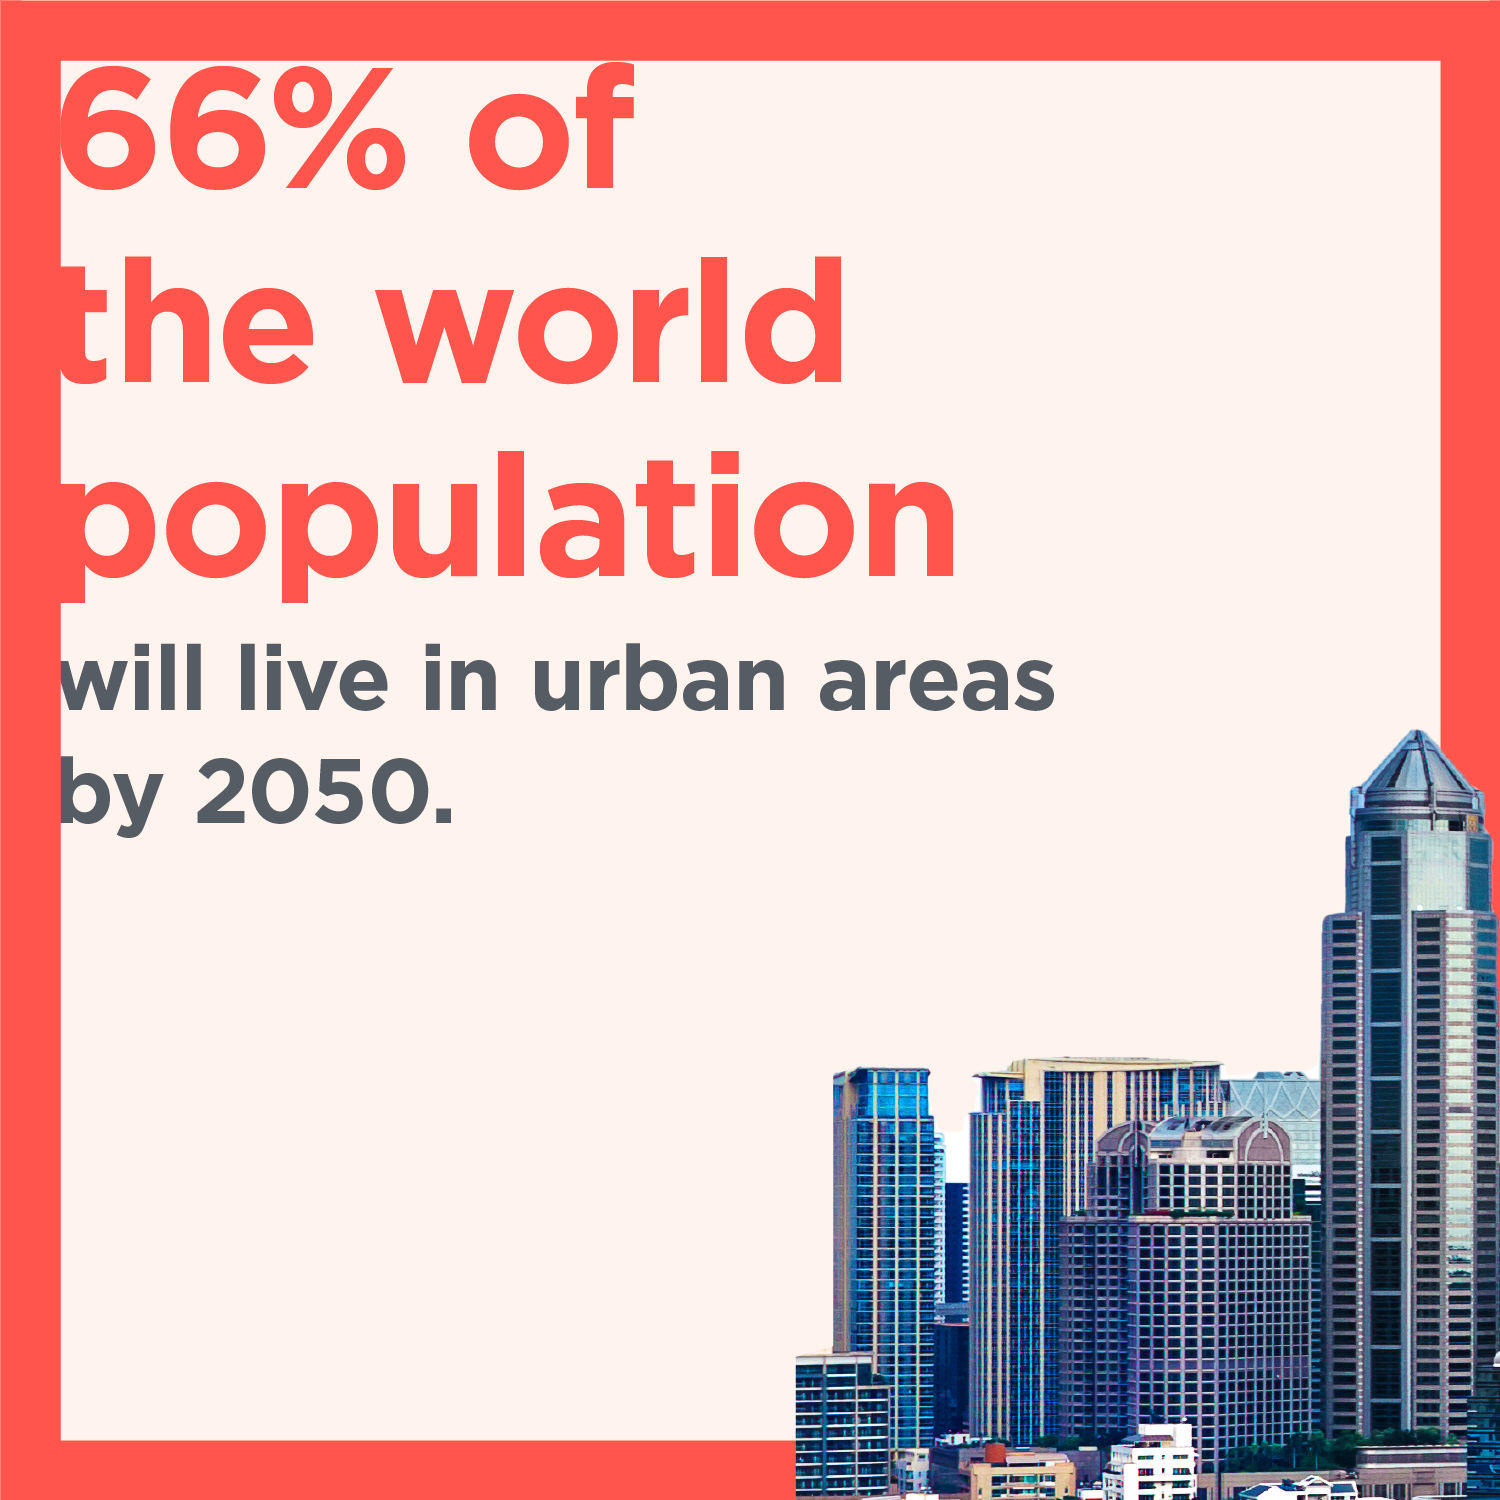 66% of the world population will live in urban areas by 2050.